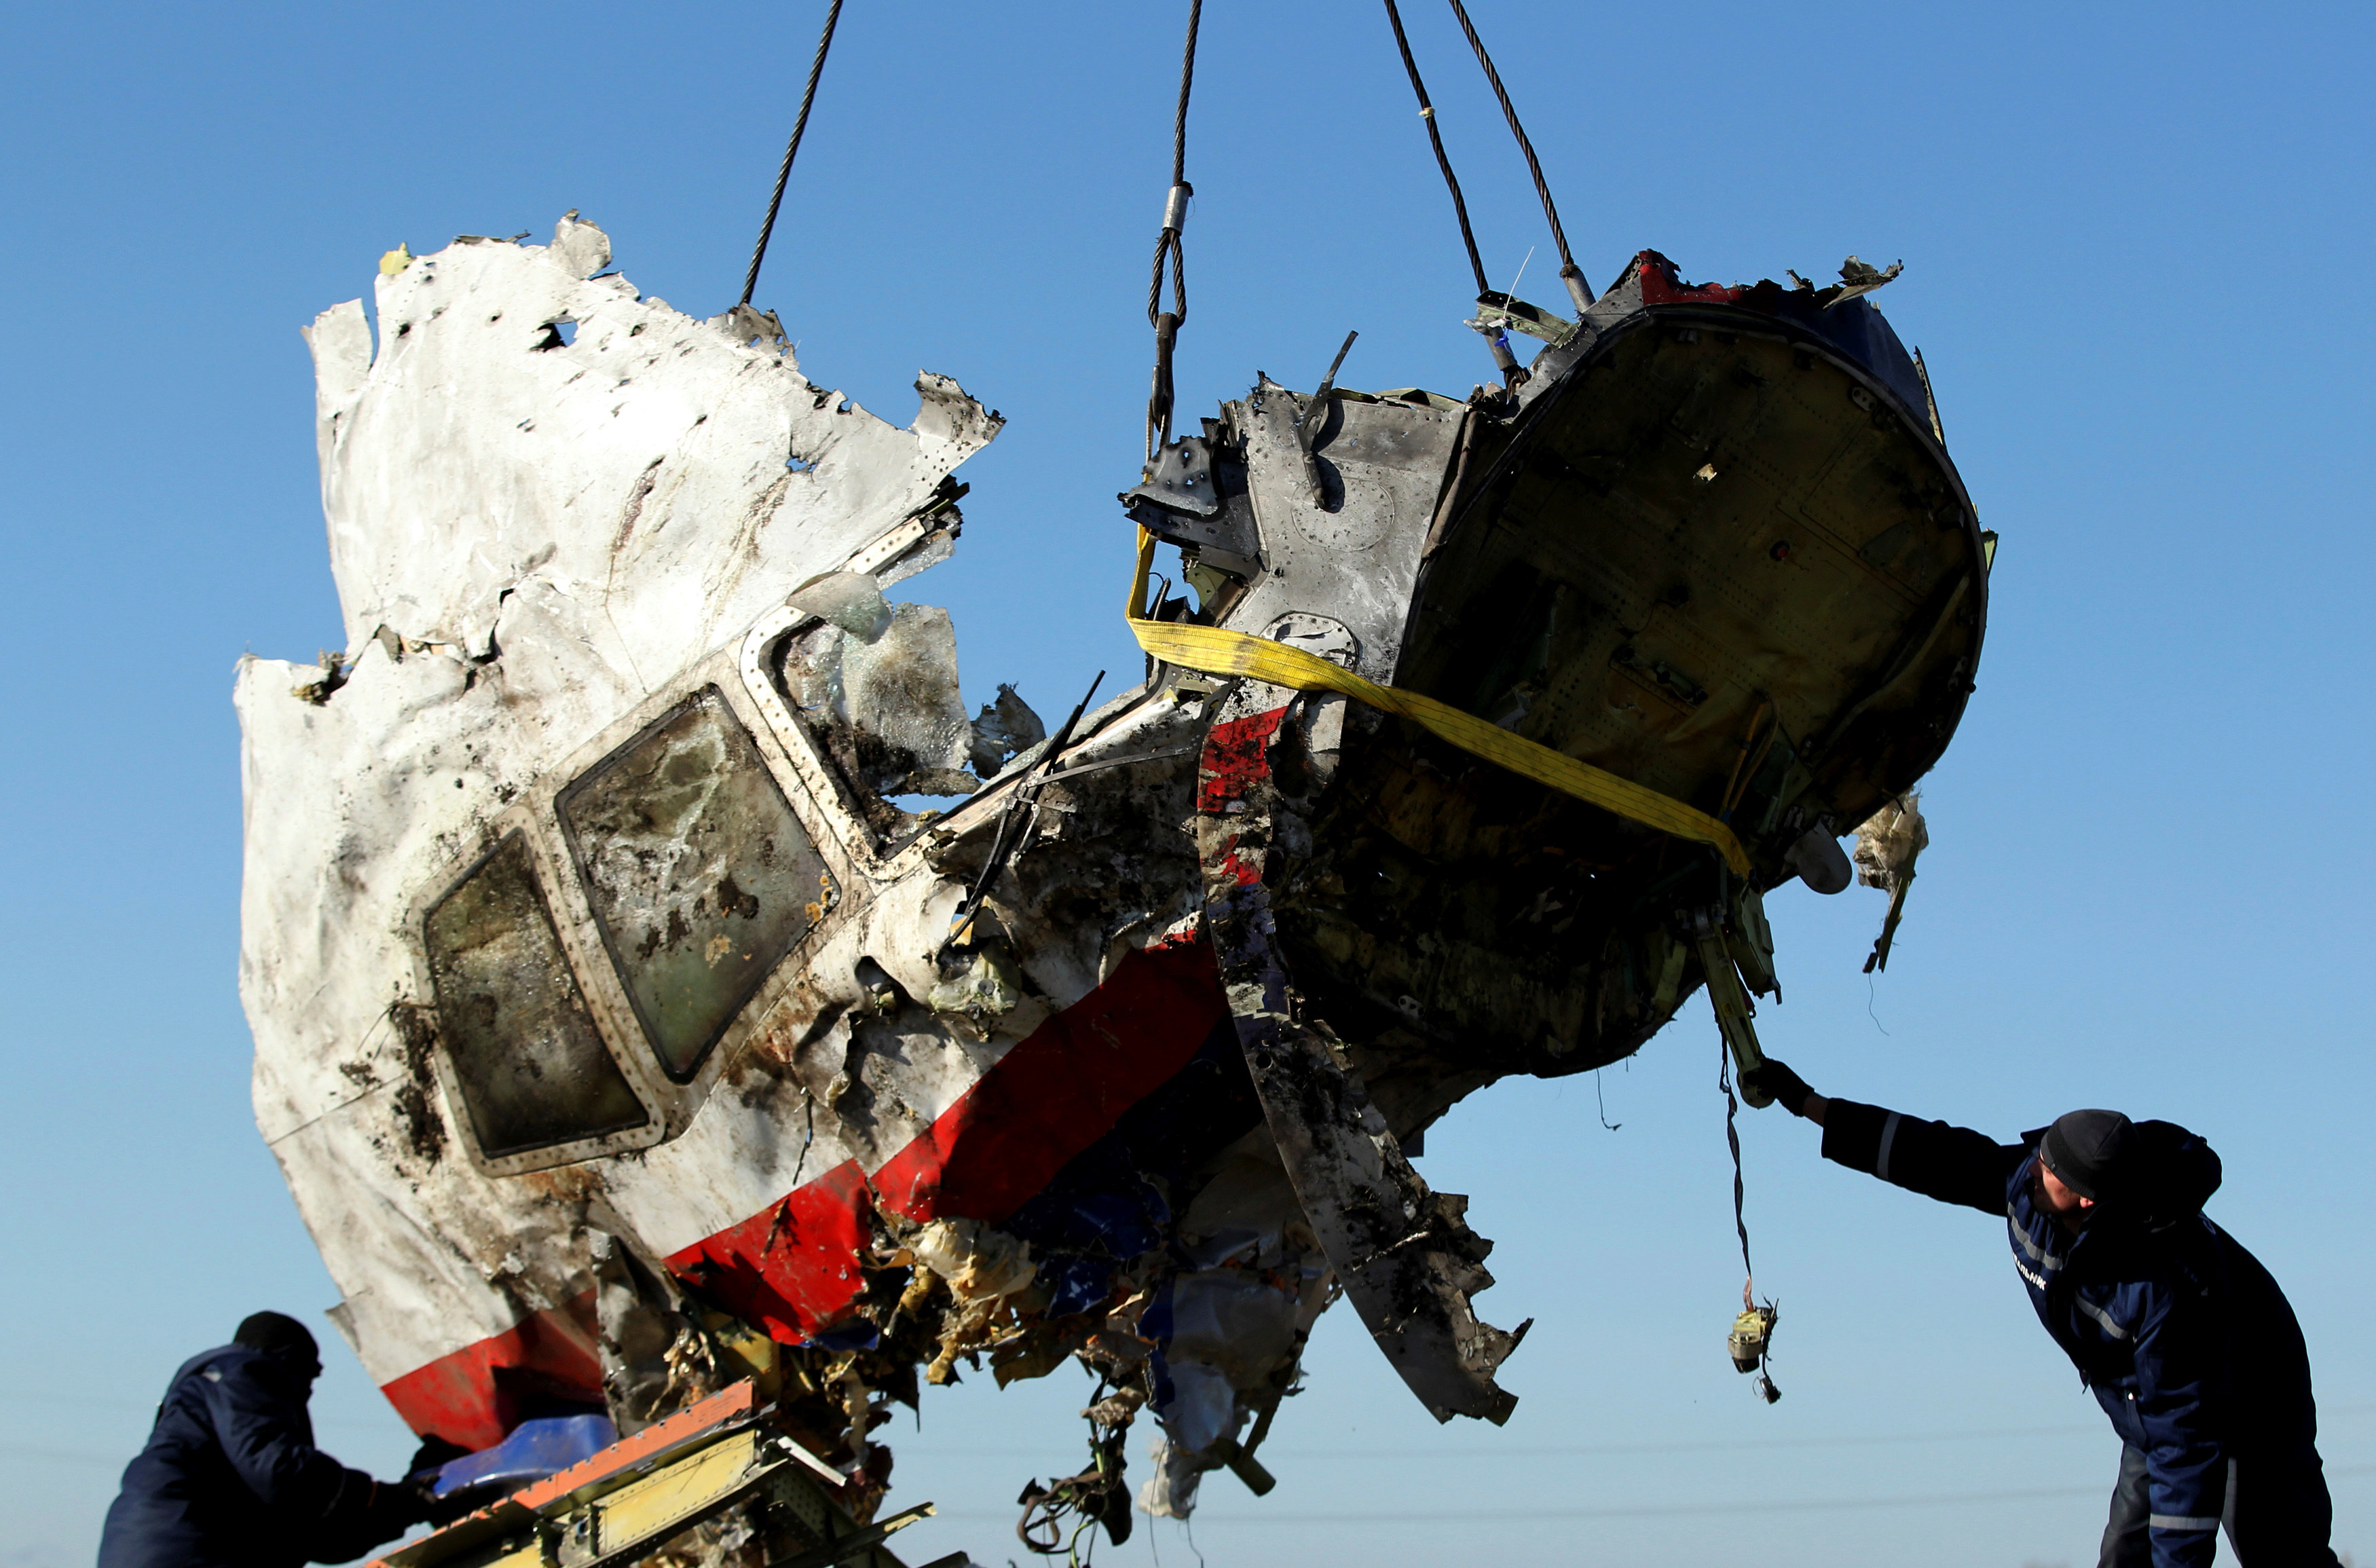 A section of the Malaysia Airlines flight MH17 wreckage in which 298 people died. Photo: Reuters